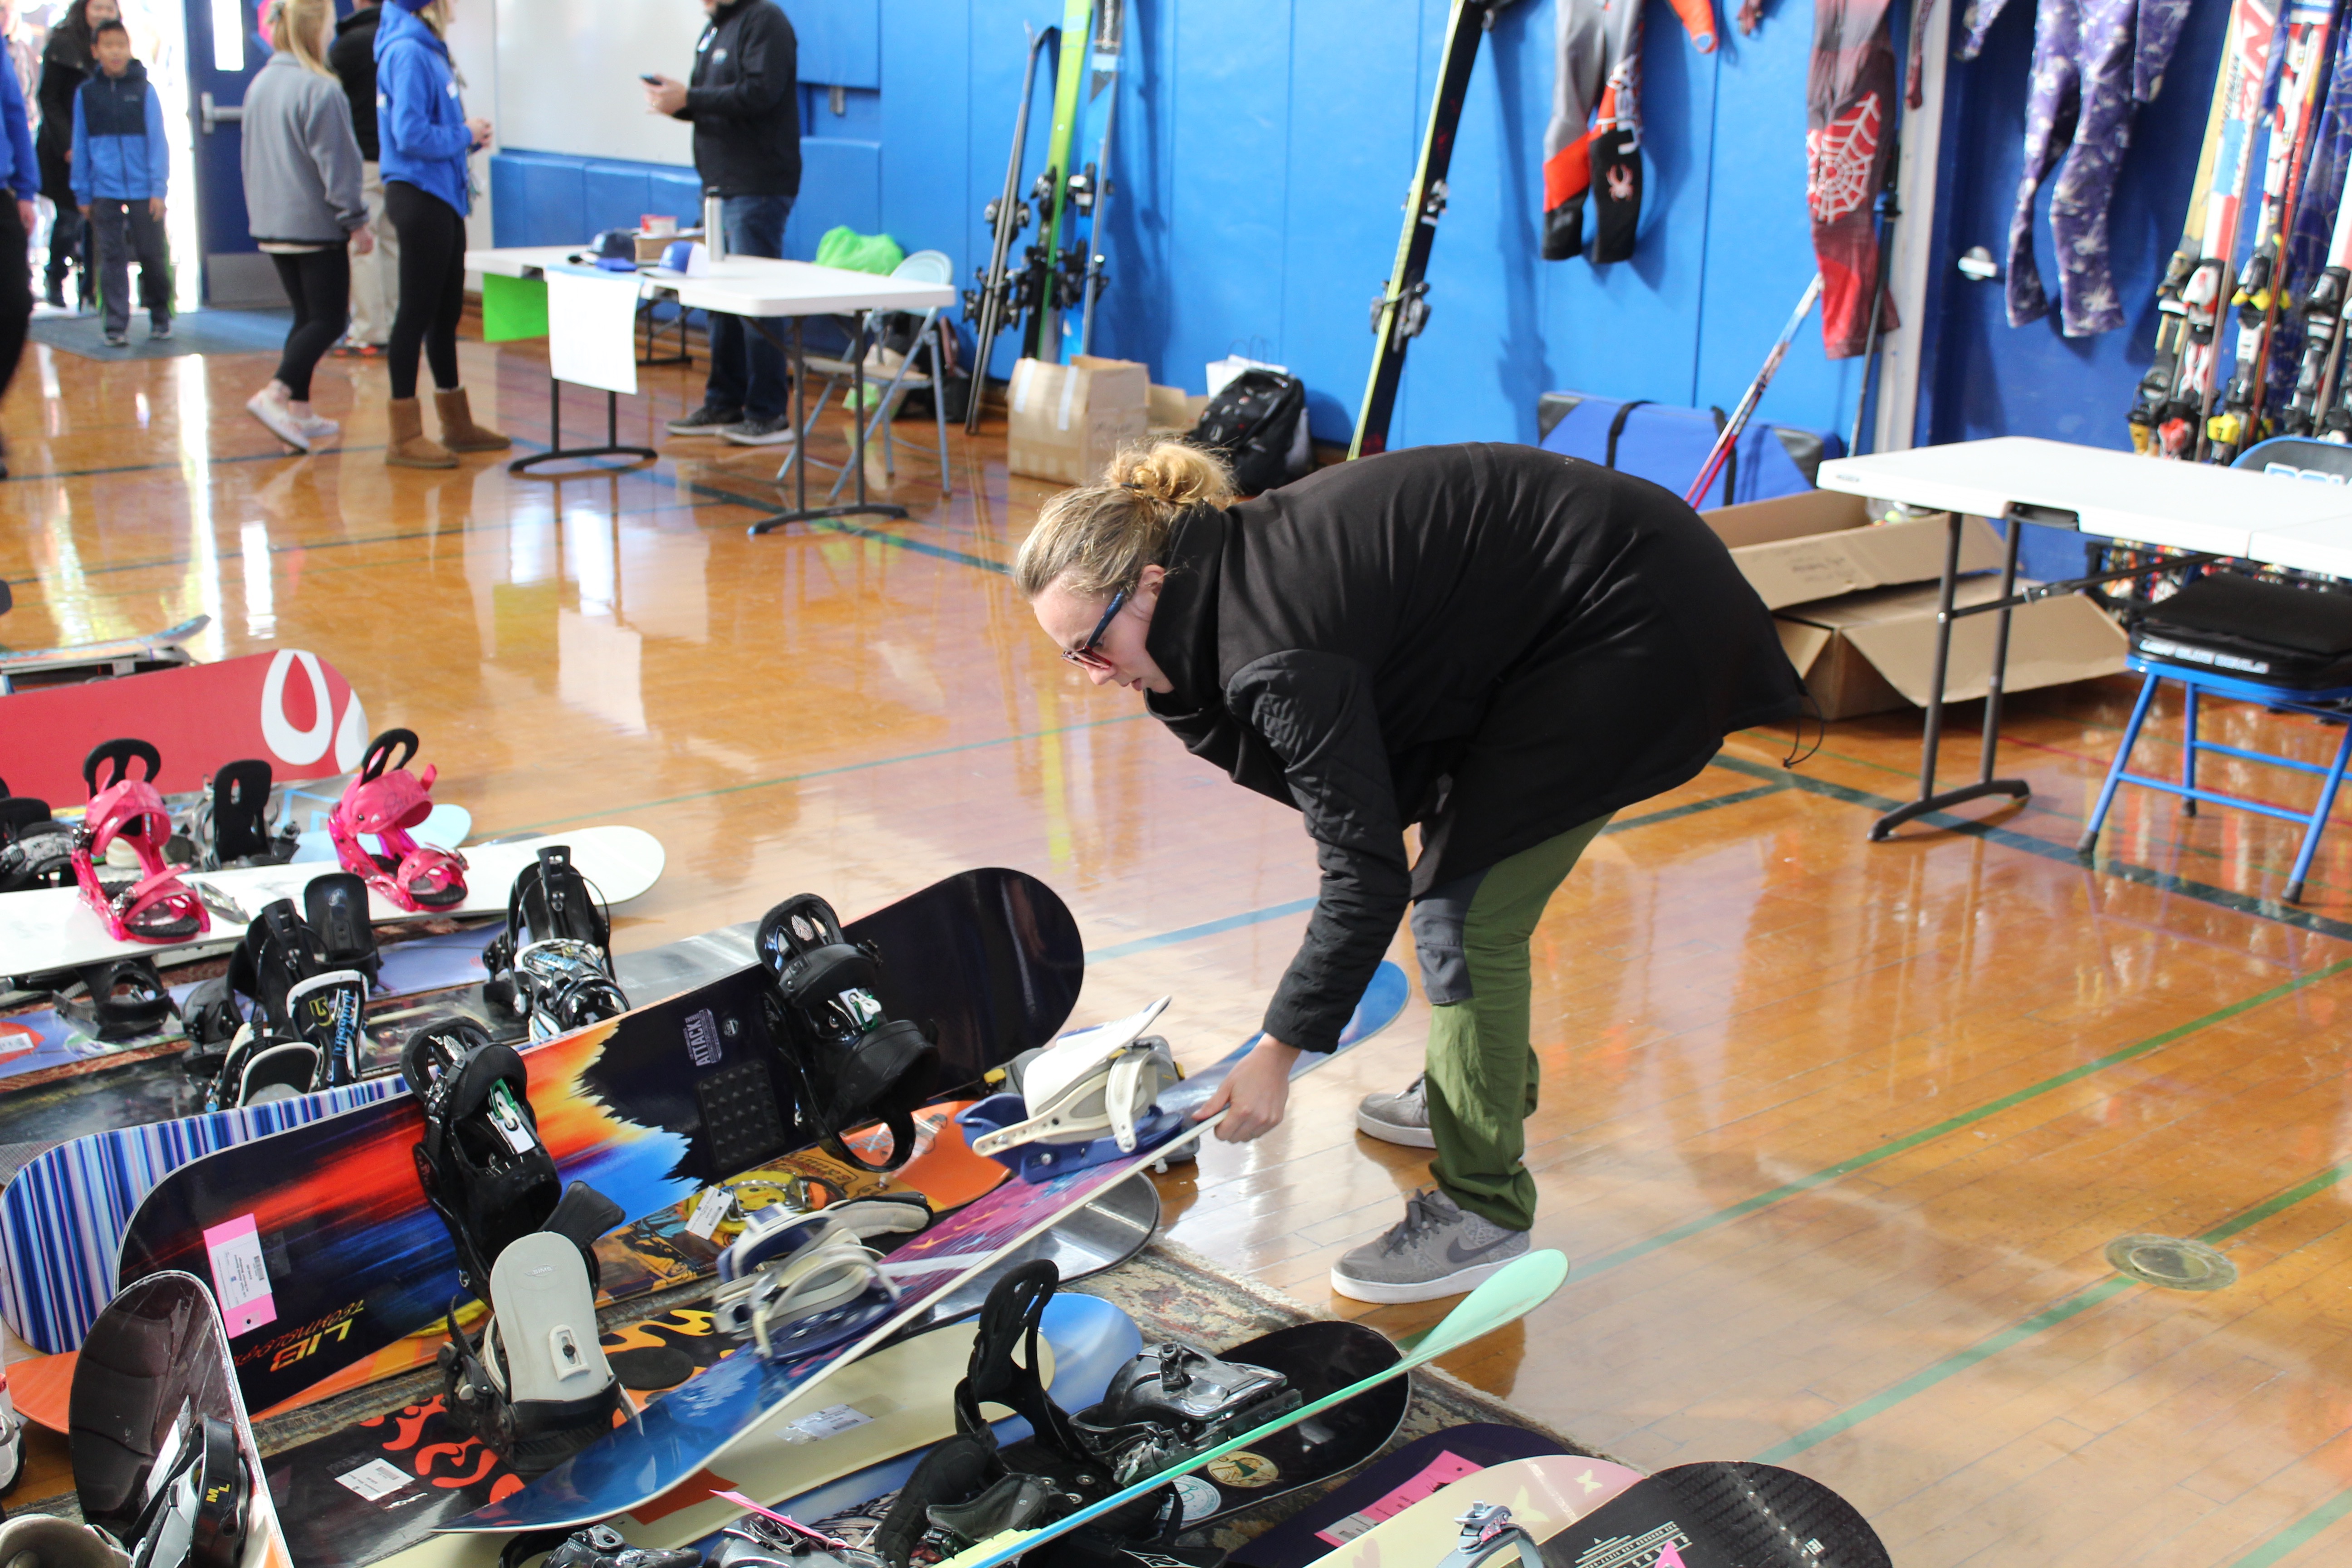 Snowboards are a very popular item at the ski swap.